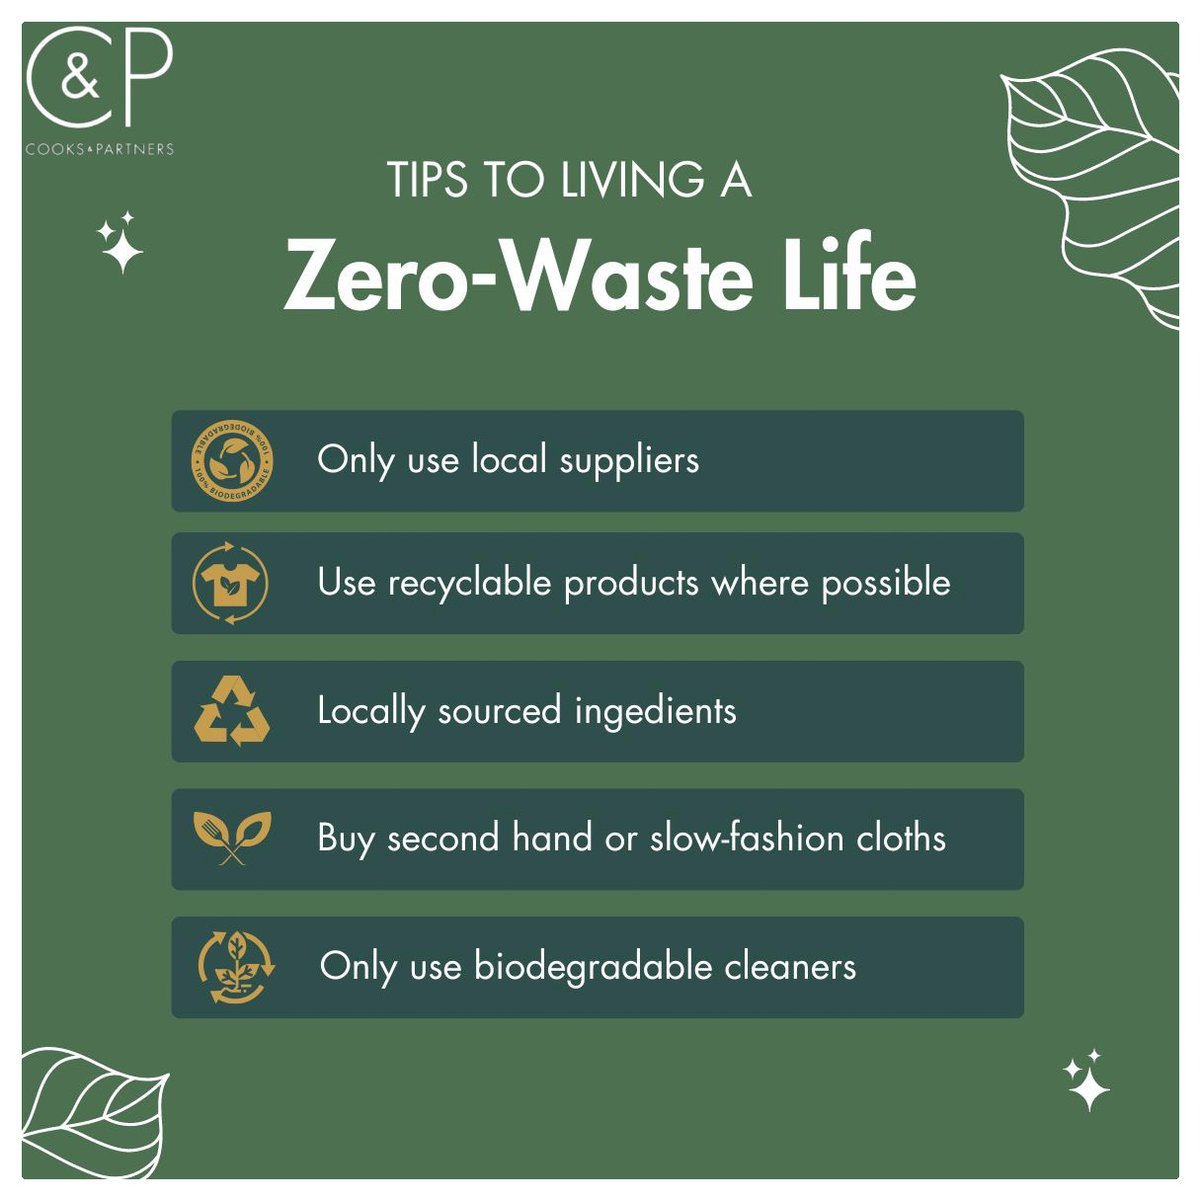 At Cooks and Partners we support Zero-Waste and adhere to our 'Sustainability Policy' rigidly . . . .

#zerowaste #foodwastewarriors #ecoevents #localproduce #localsuppliers #sustainableevents